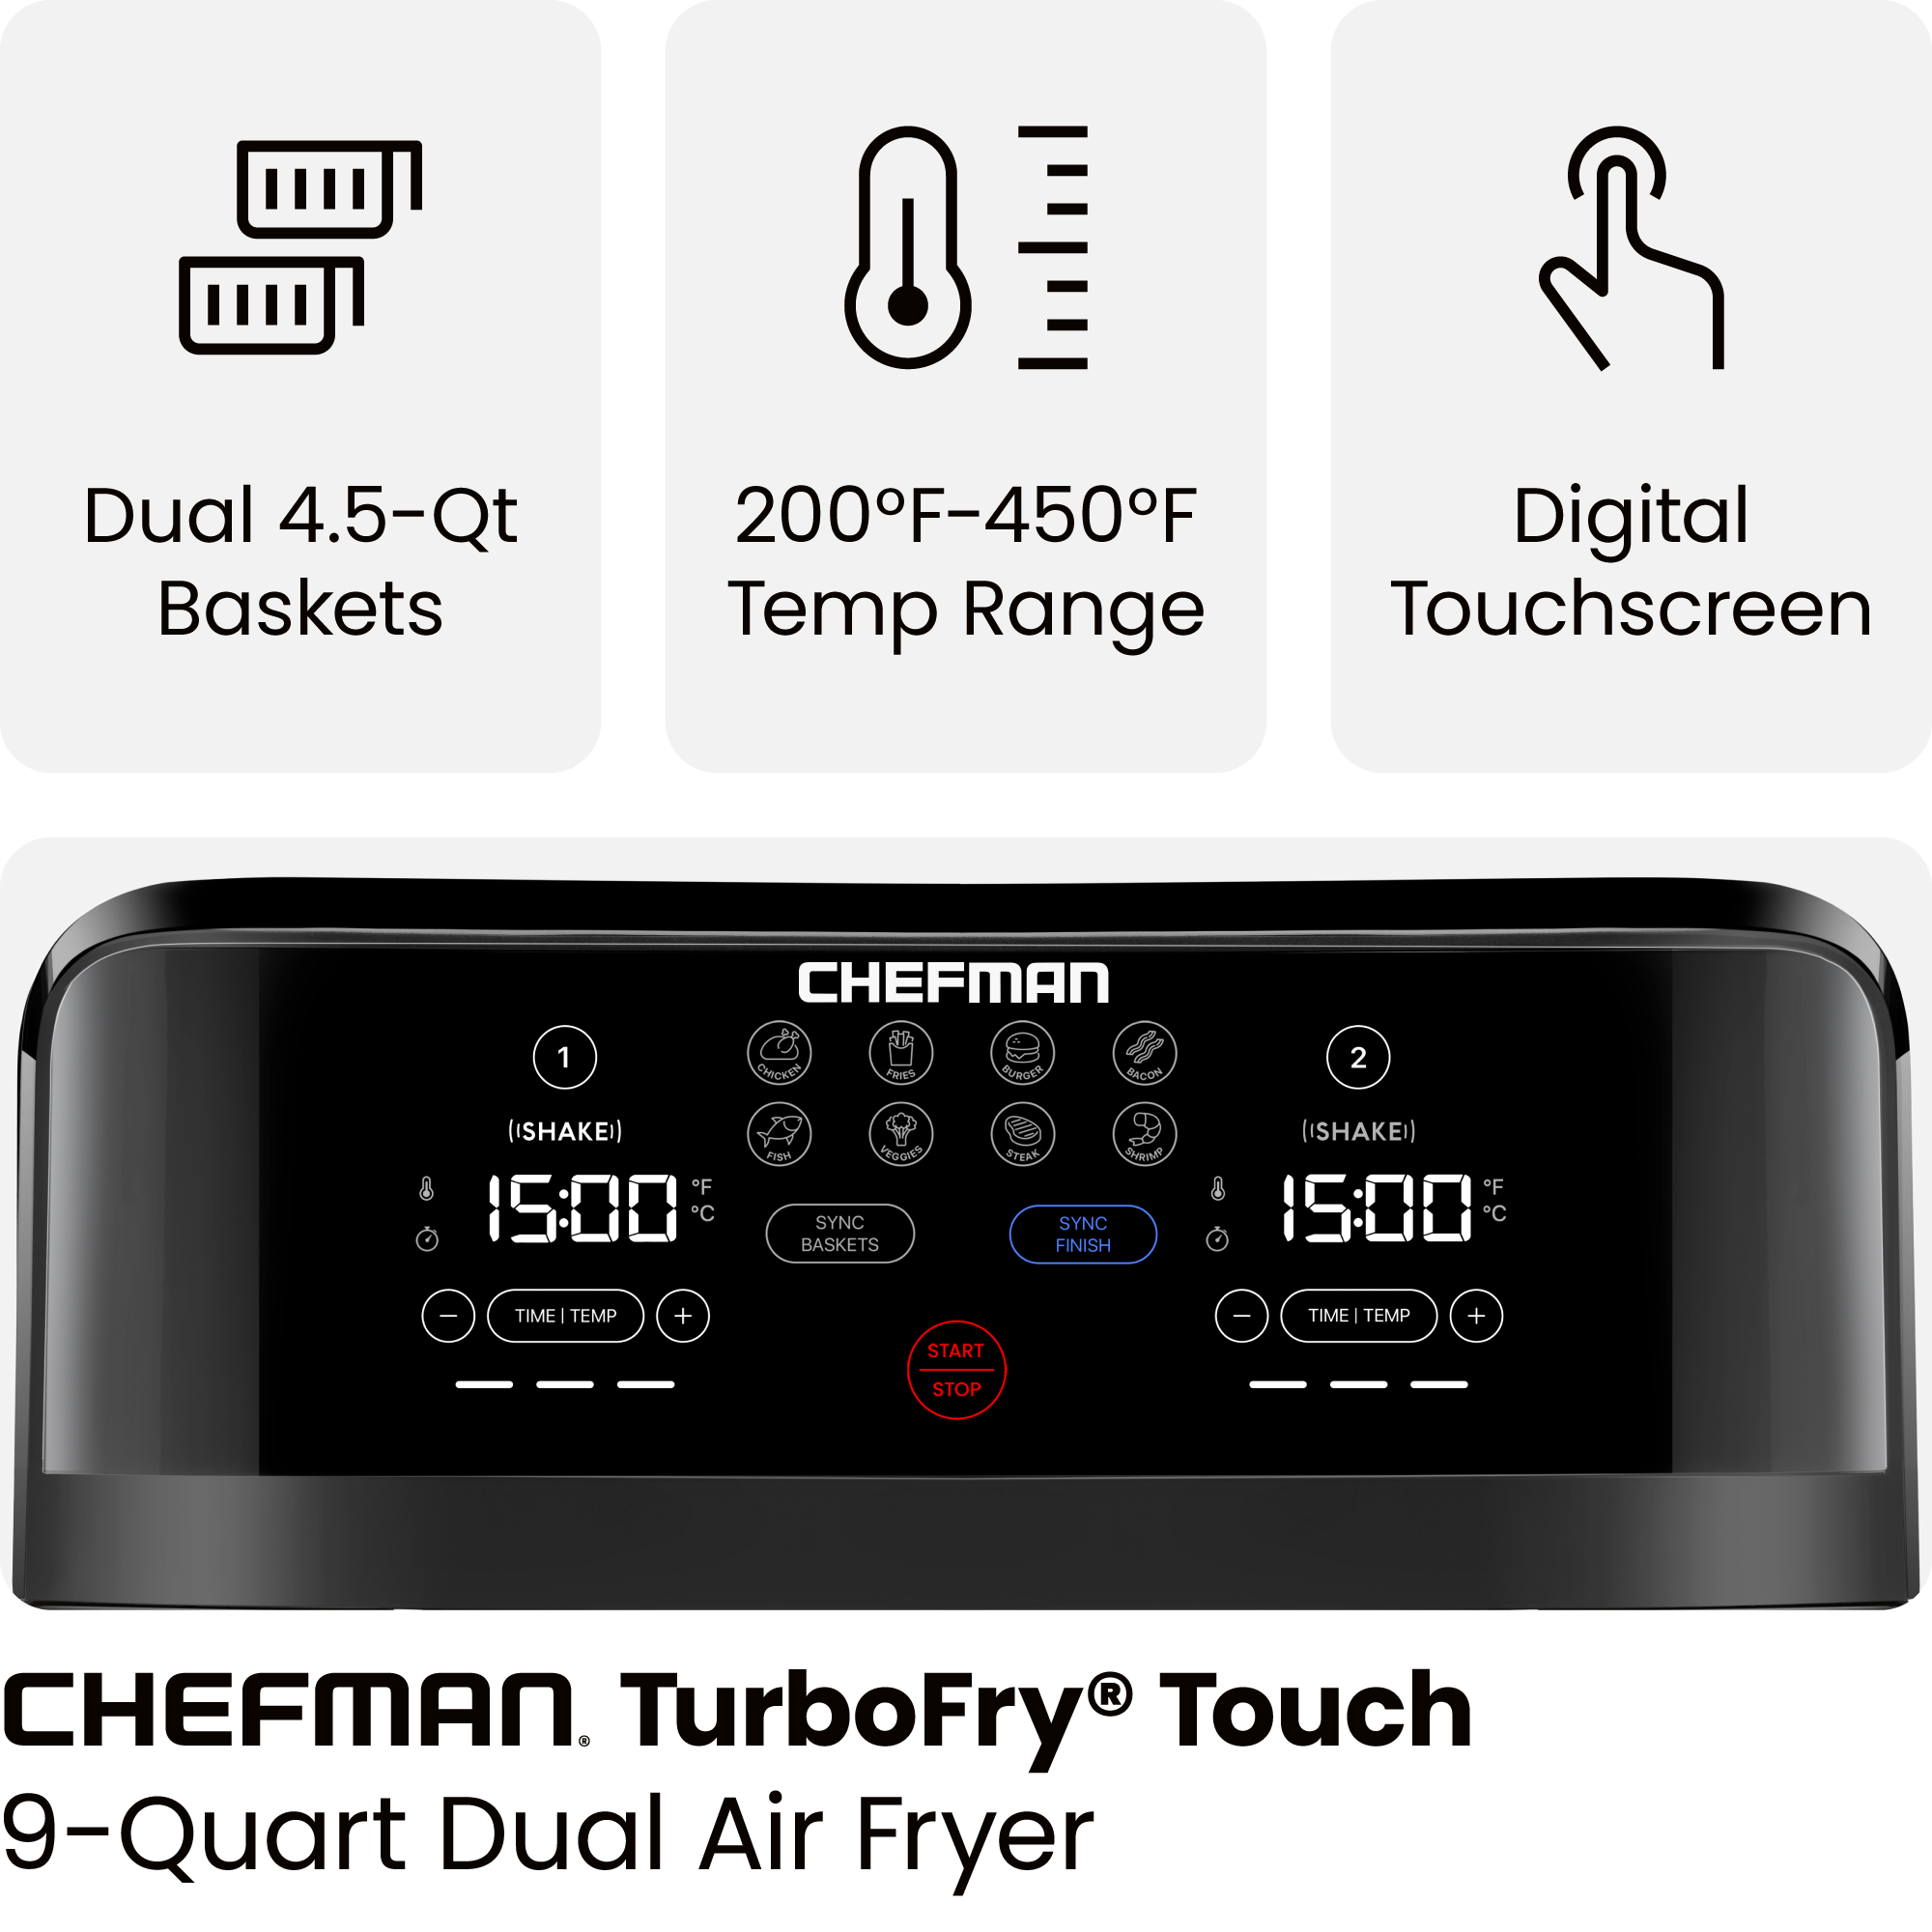 Chefman Turbofry Dual Basket Air Fryer w/ Digital Touch Display, 9 Qt Capacity - Black, New - image 3 of 8